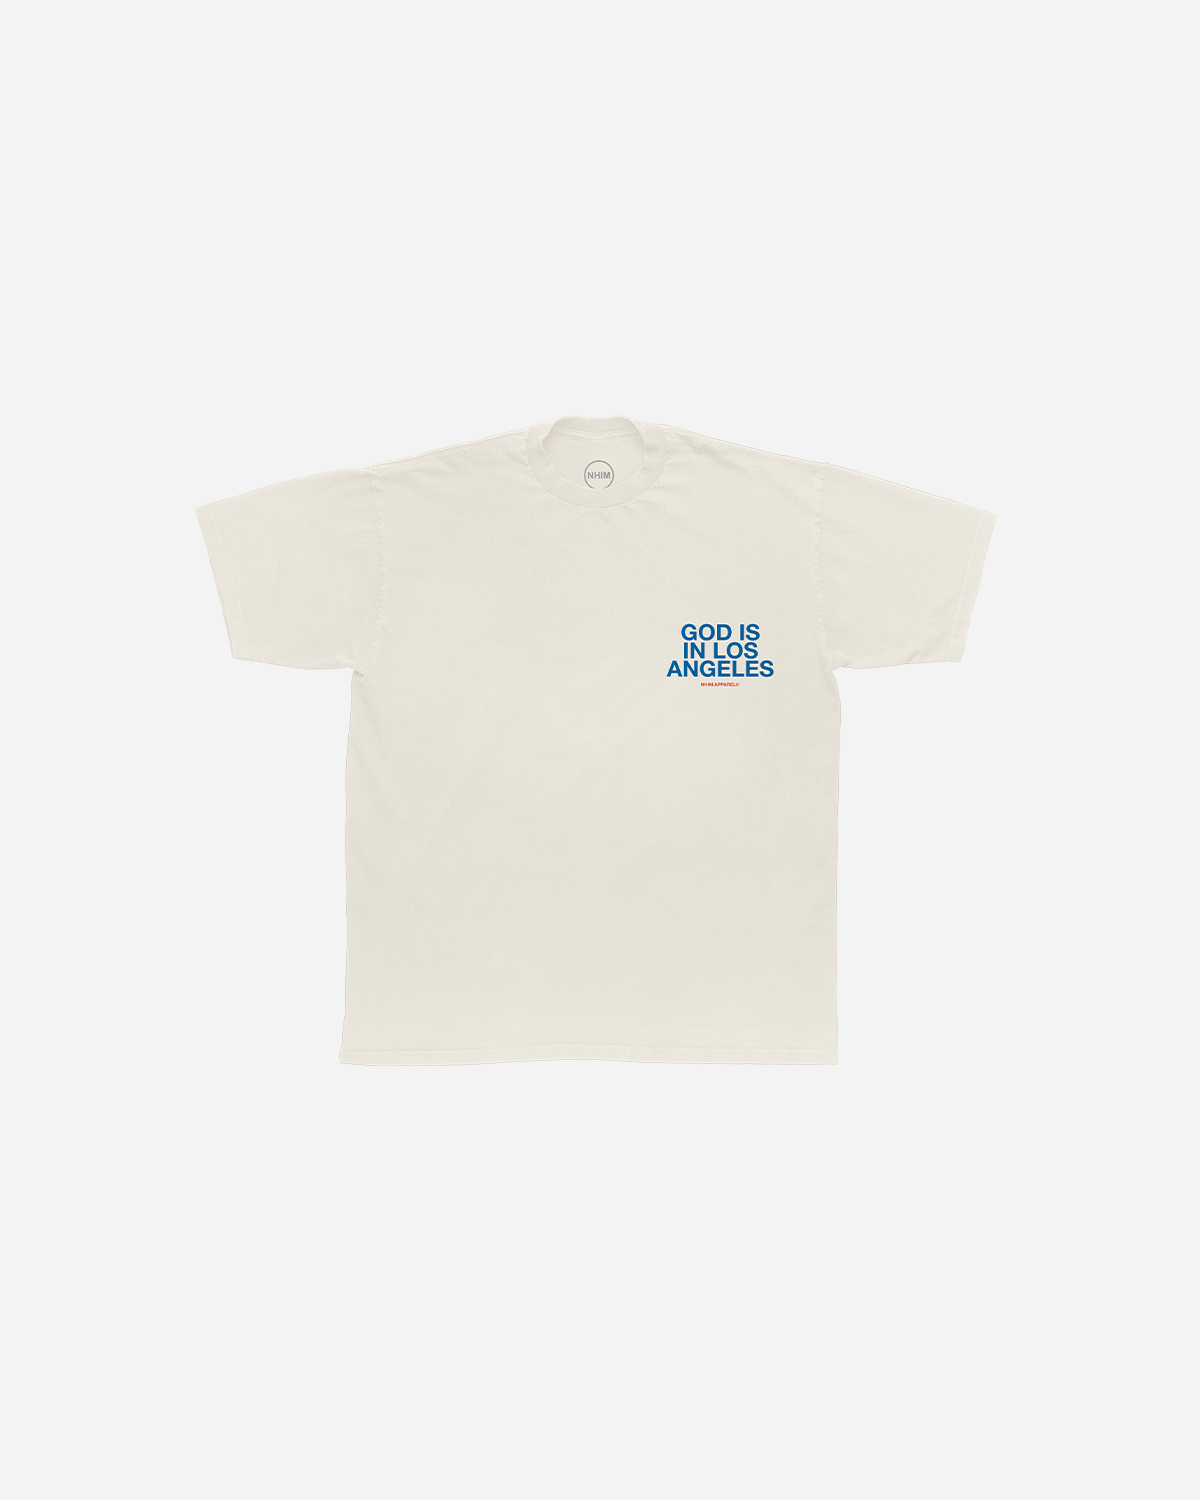 The God Is In Los Angeles Shirt is a premium garment dyed, ethically sourced and made in the USA T-shirt made by NHIM Apparel Christian clothing brand.